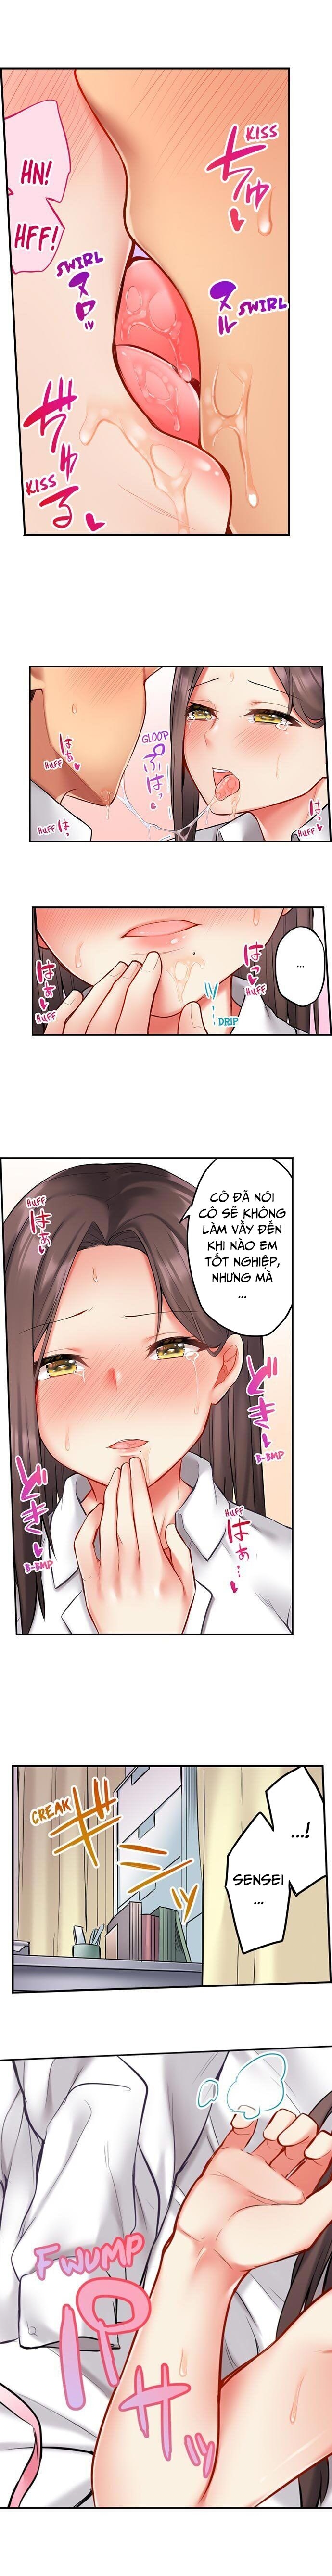 Xem ảnh If I See Your Boobs, There’s No Way I Won’t Lick Them - Chap 8 - 1624034021349_0 - HentaiTruyen.net